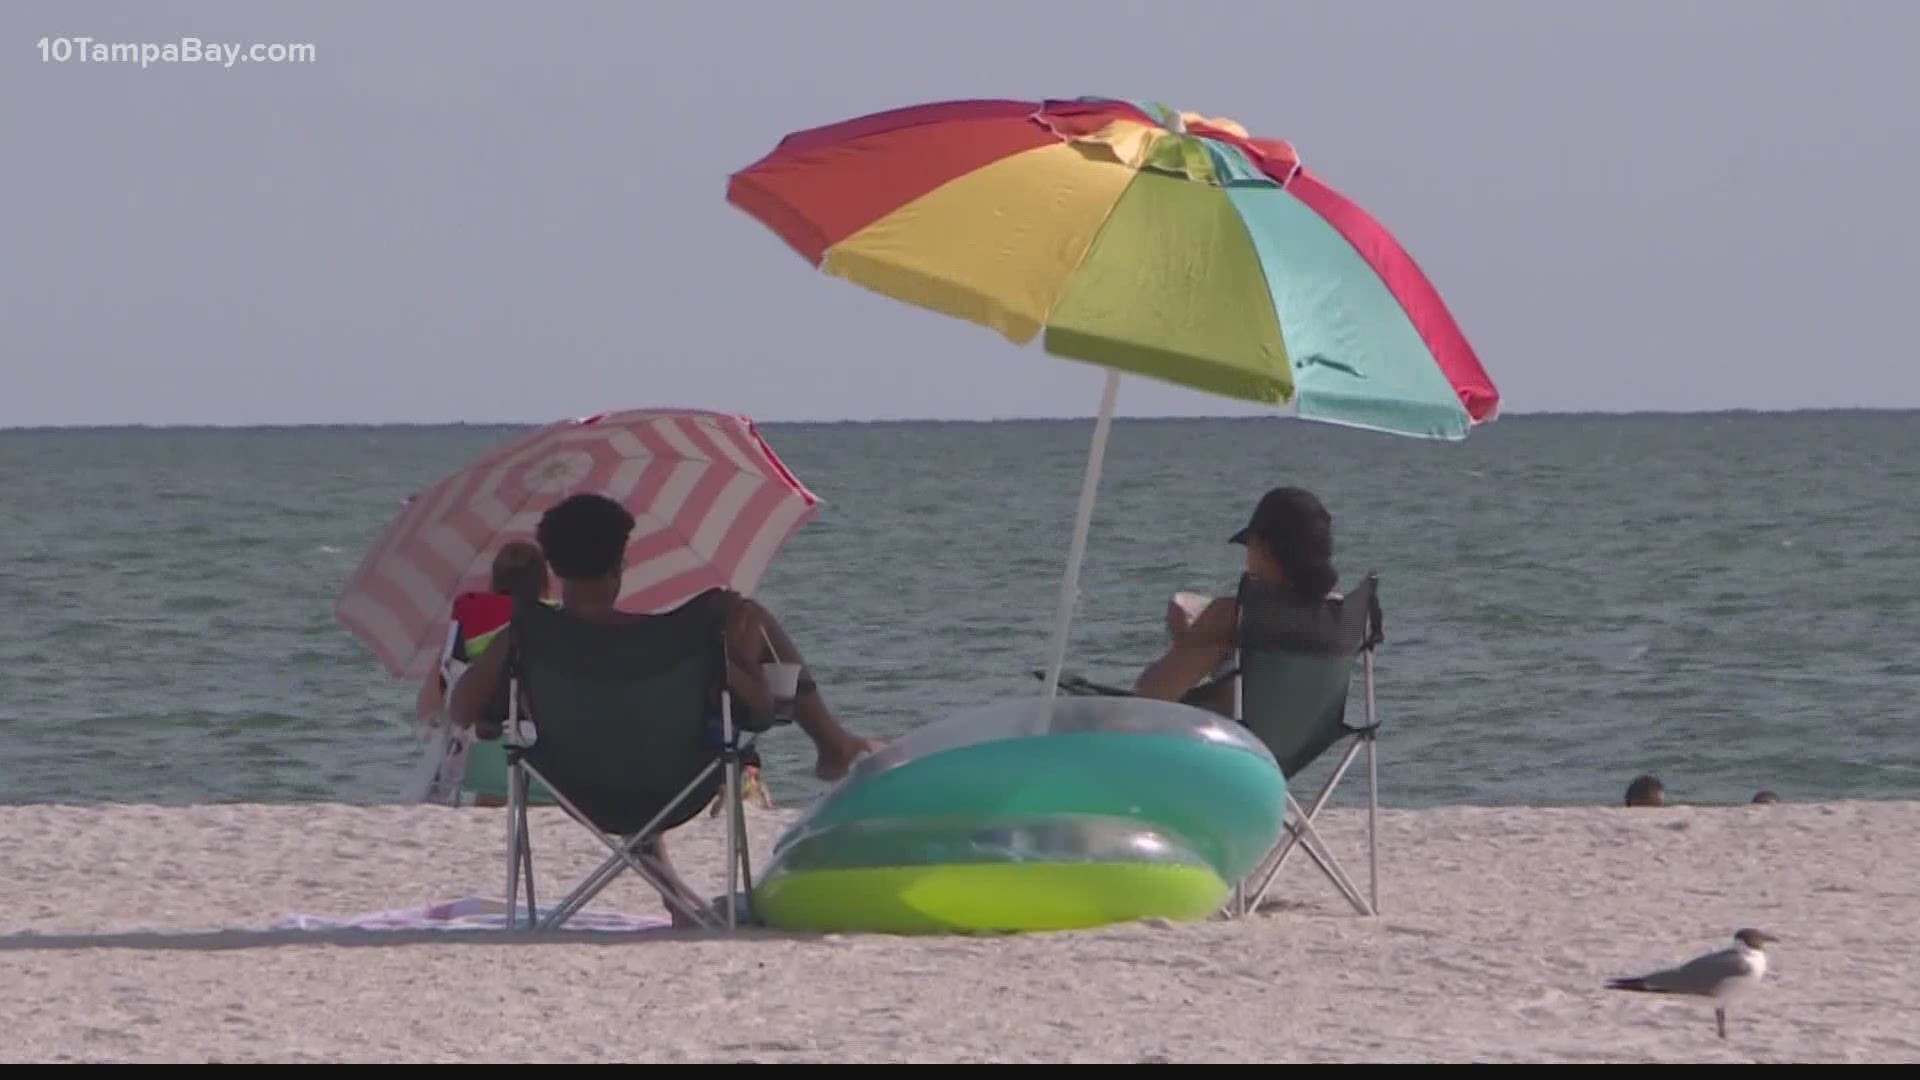 Millions of Americans are expected to travel to COVID-19 hot spots, including some destinations right here in Florida.